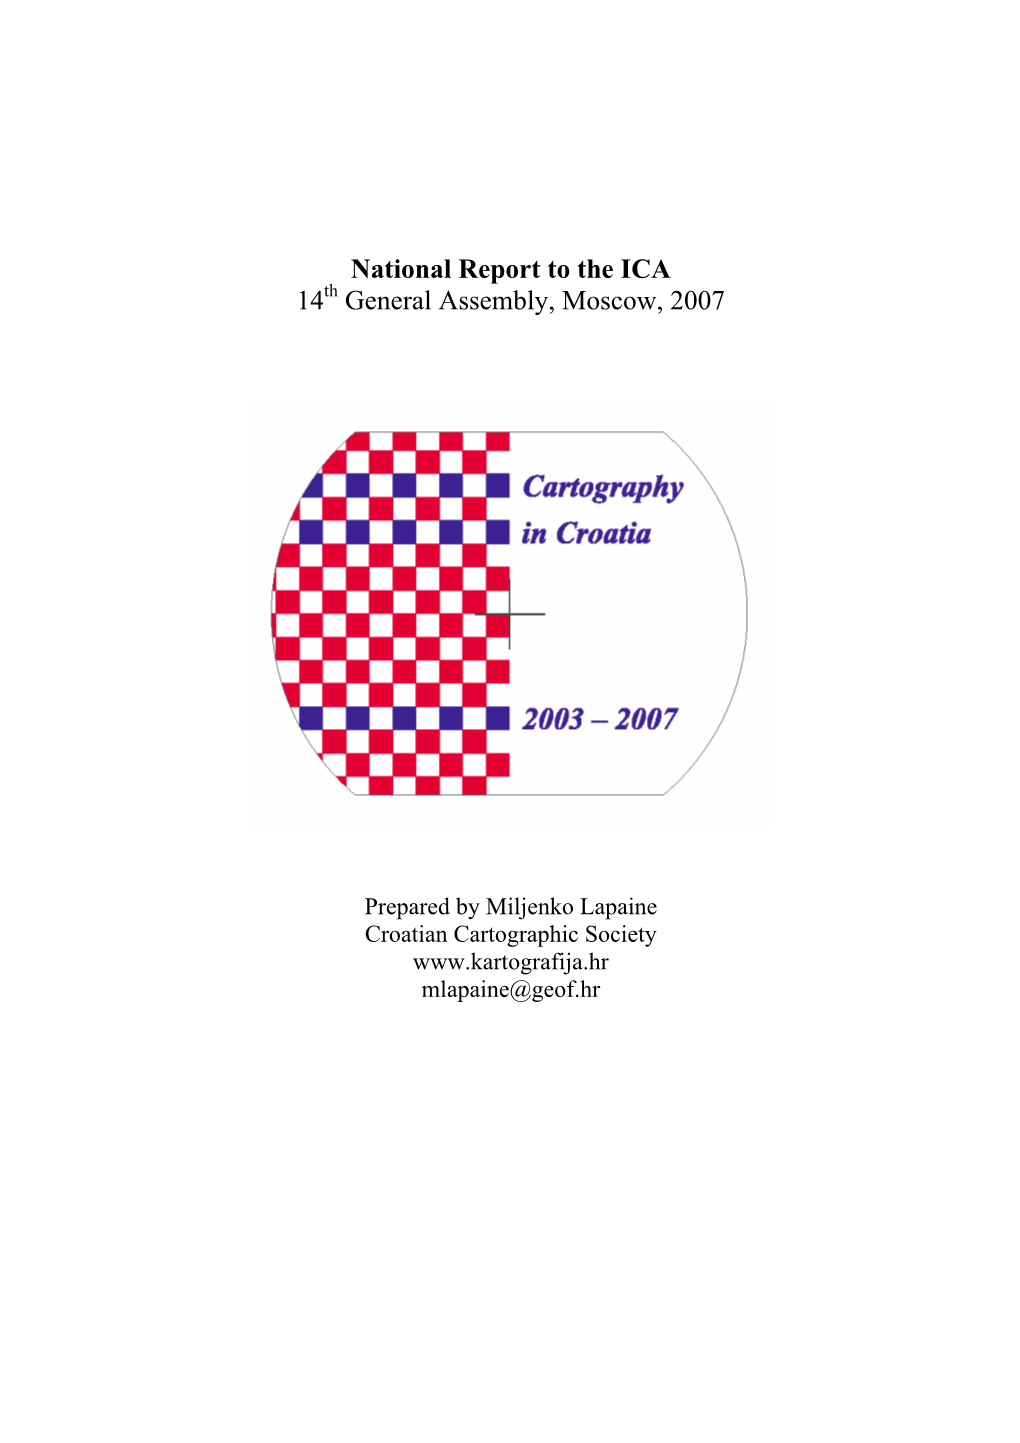 National Report to the ICA 14Th General Assembly, Moscow, 2007